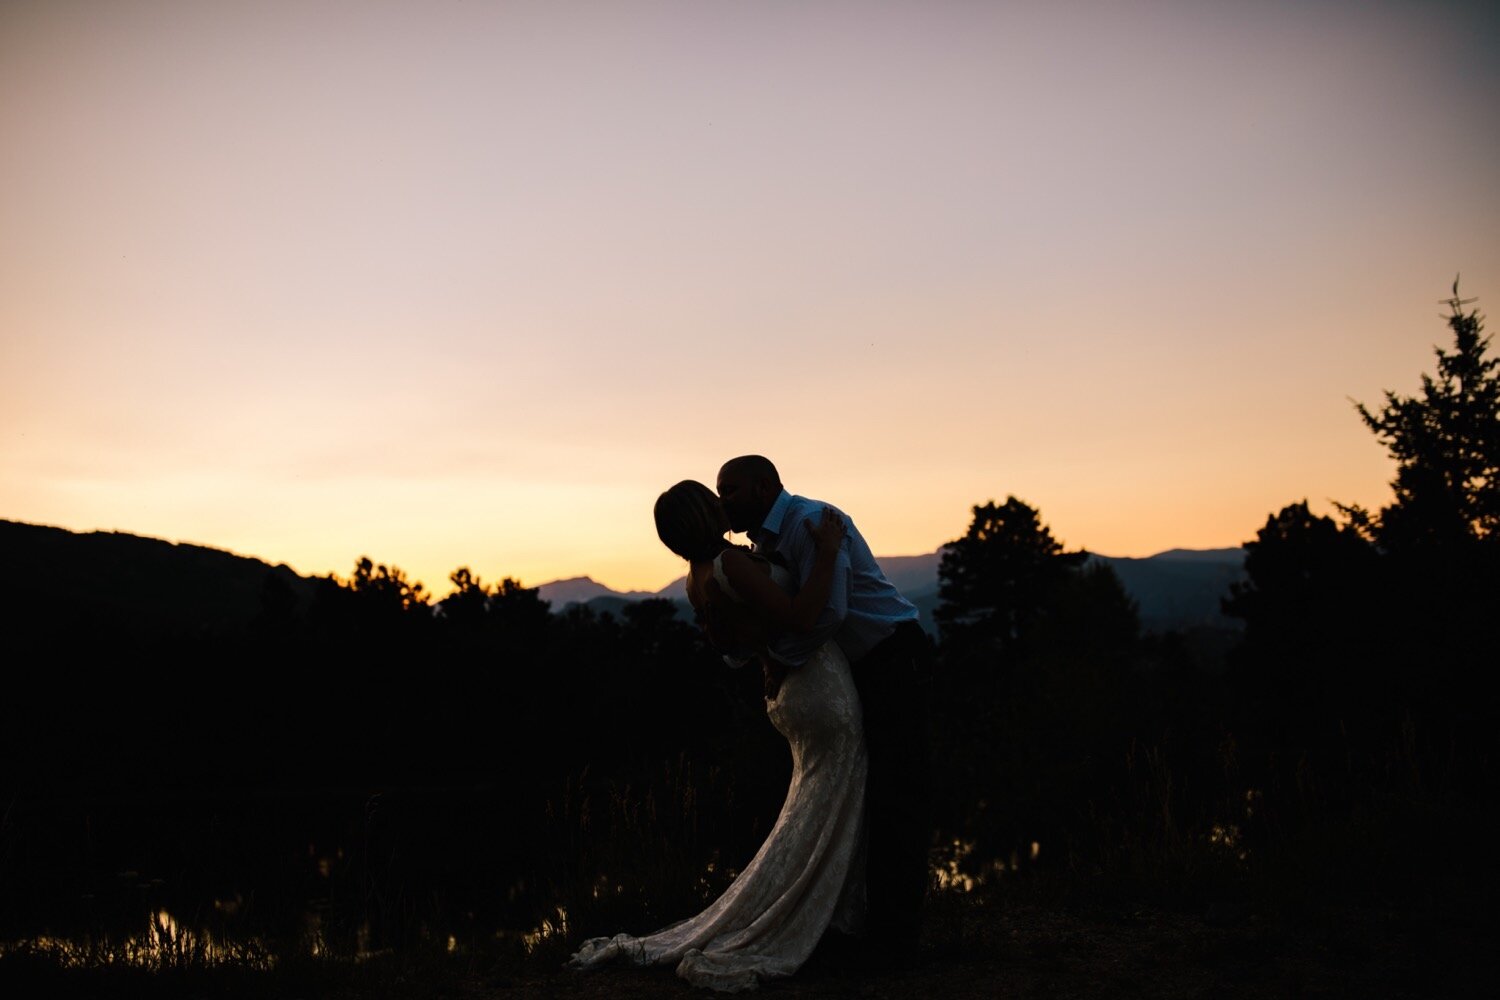  Sunset wedding photos, Estes Park Wedding Planner, Cheley Lodge and Grove, Cheley Colorado Camps, Colorado Wedding, Colorado Elopement, Wedding Planning, Wedding Inspiration, Wedding ideas, Elopement Planning, Elopement Inspiration, Elopement ideas,